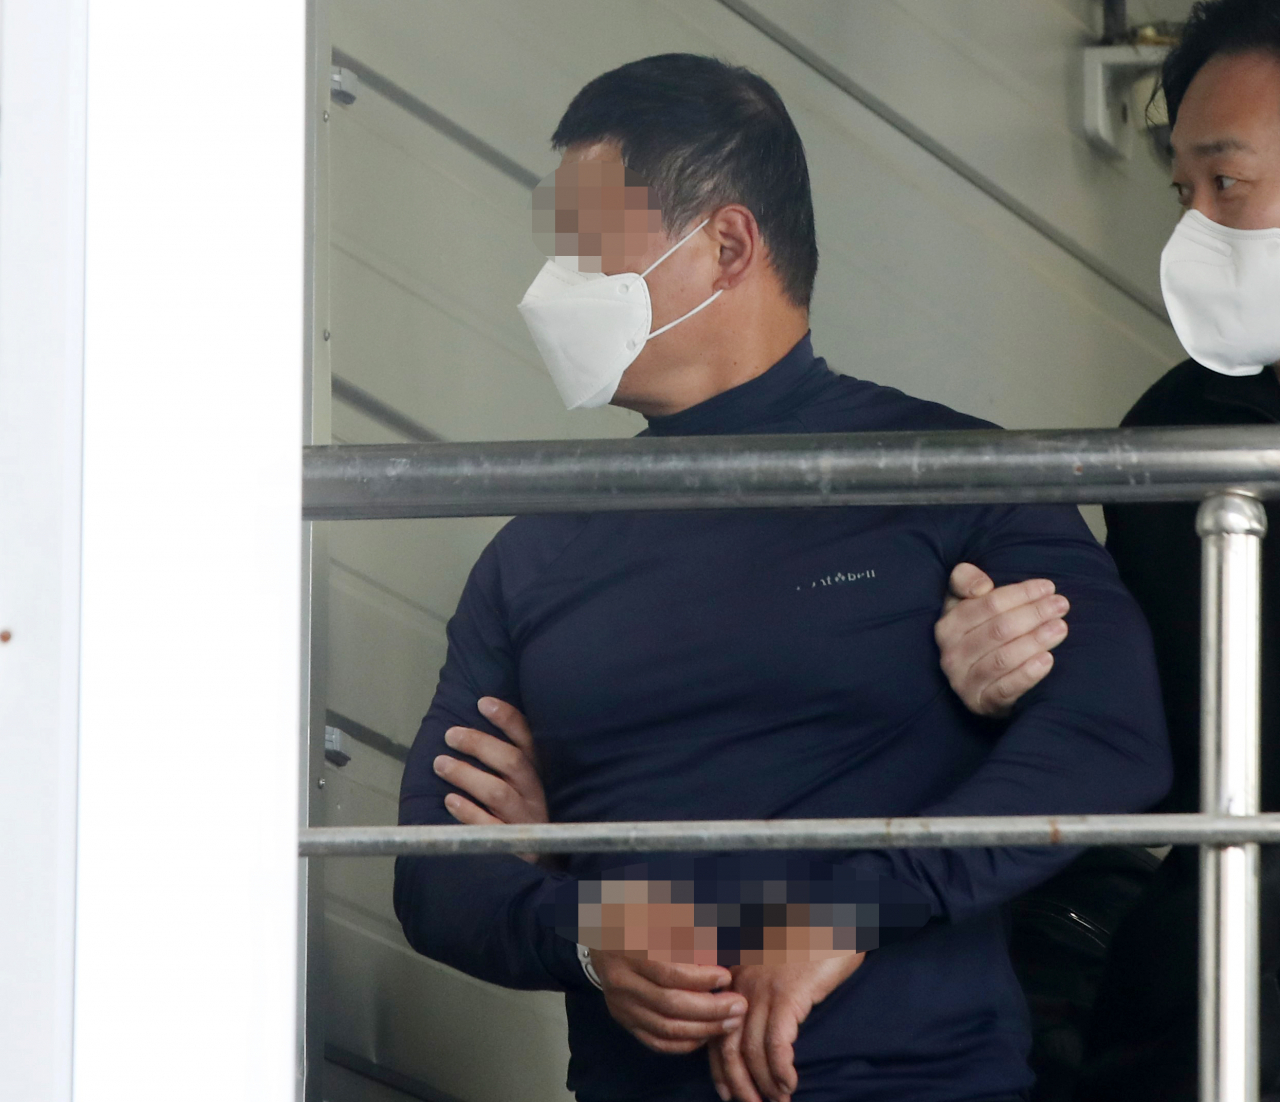 A YouTuber in his 50s is escorted by a police officer in Busan on Thursday after he stabbed to death another YouTuber in front of the Busan District Court. (Joint Press Corp.)